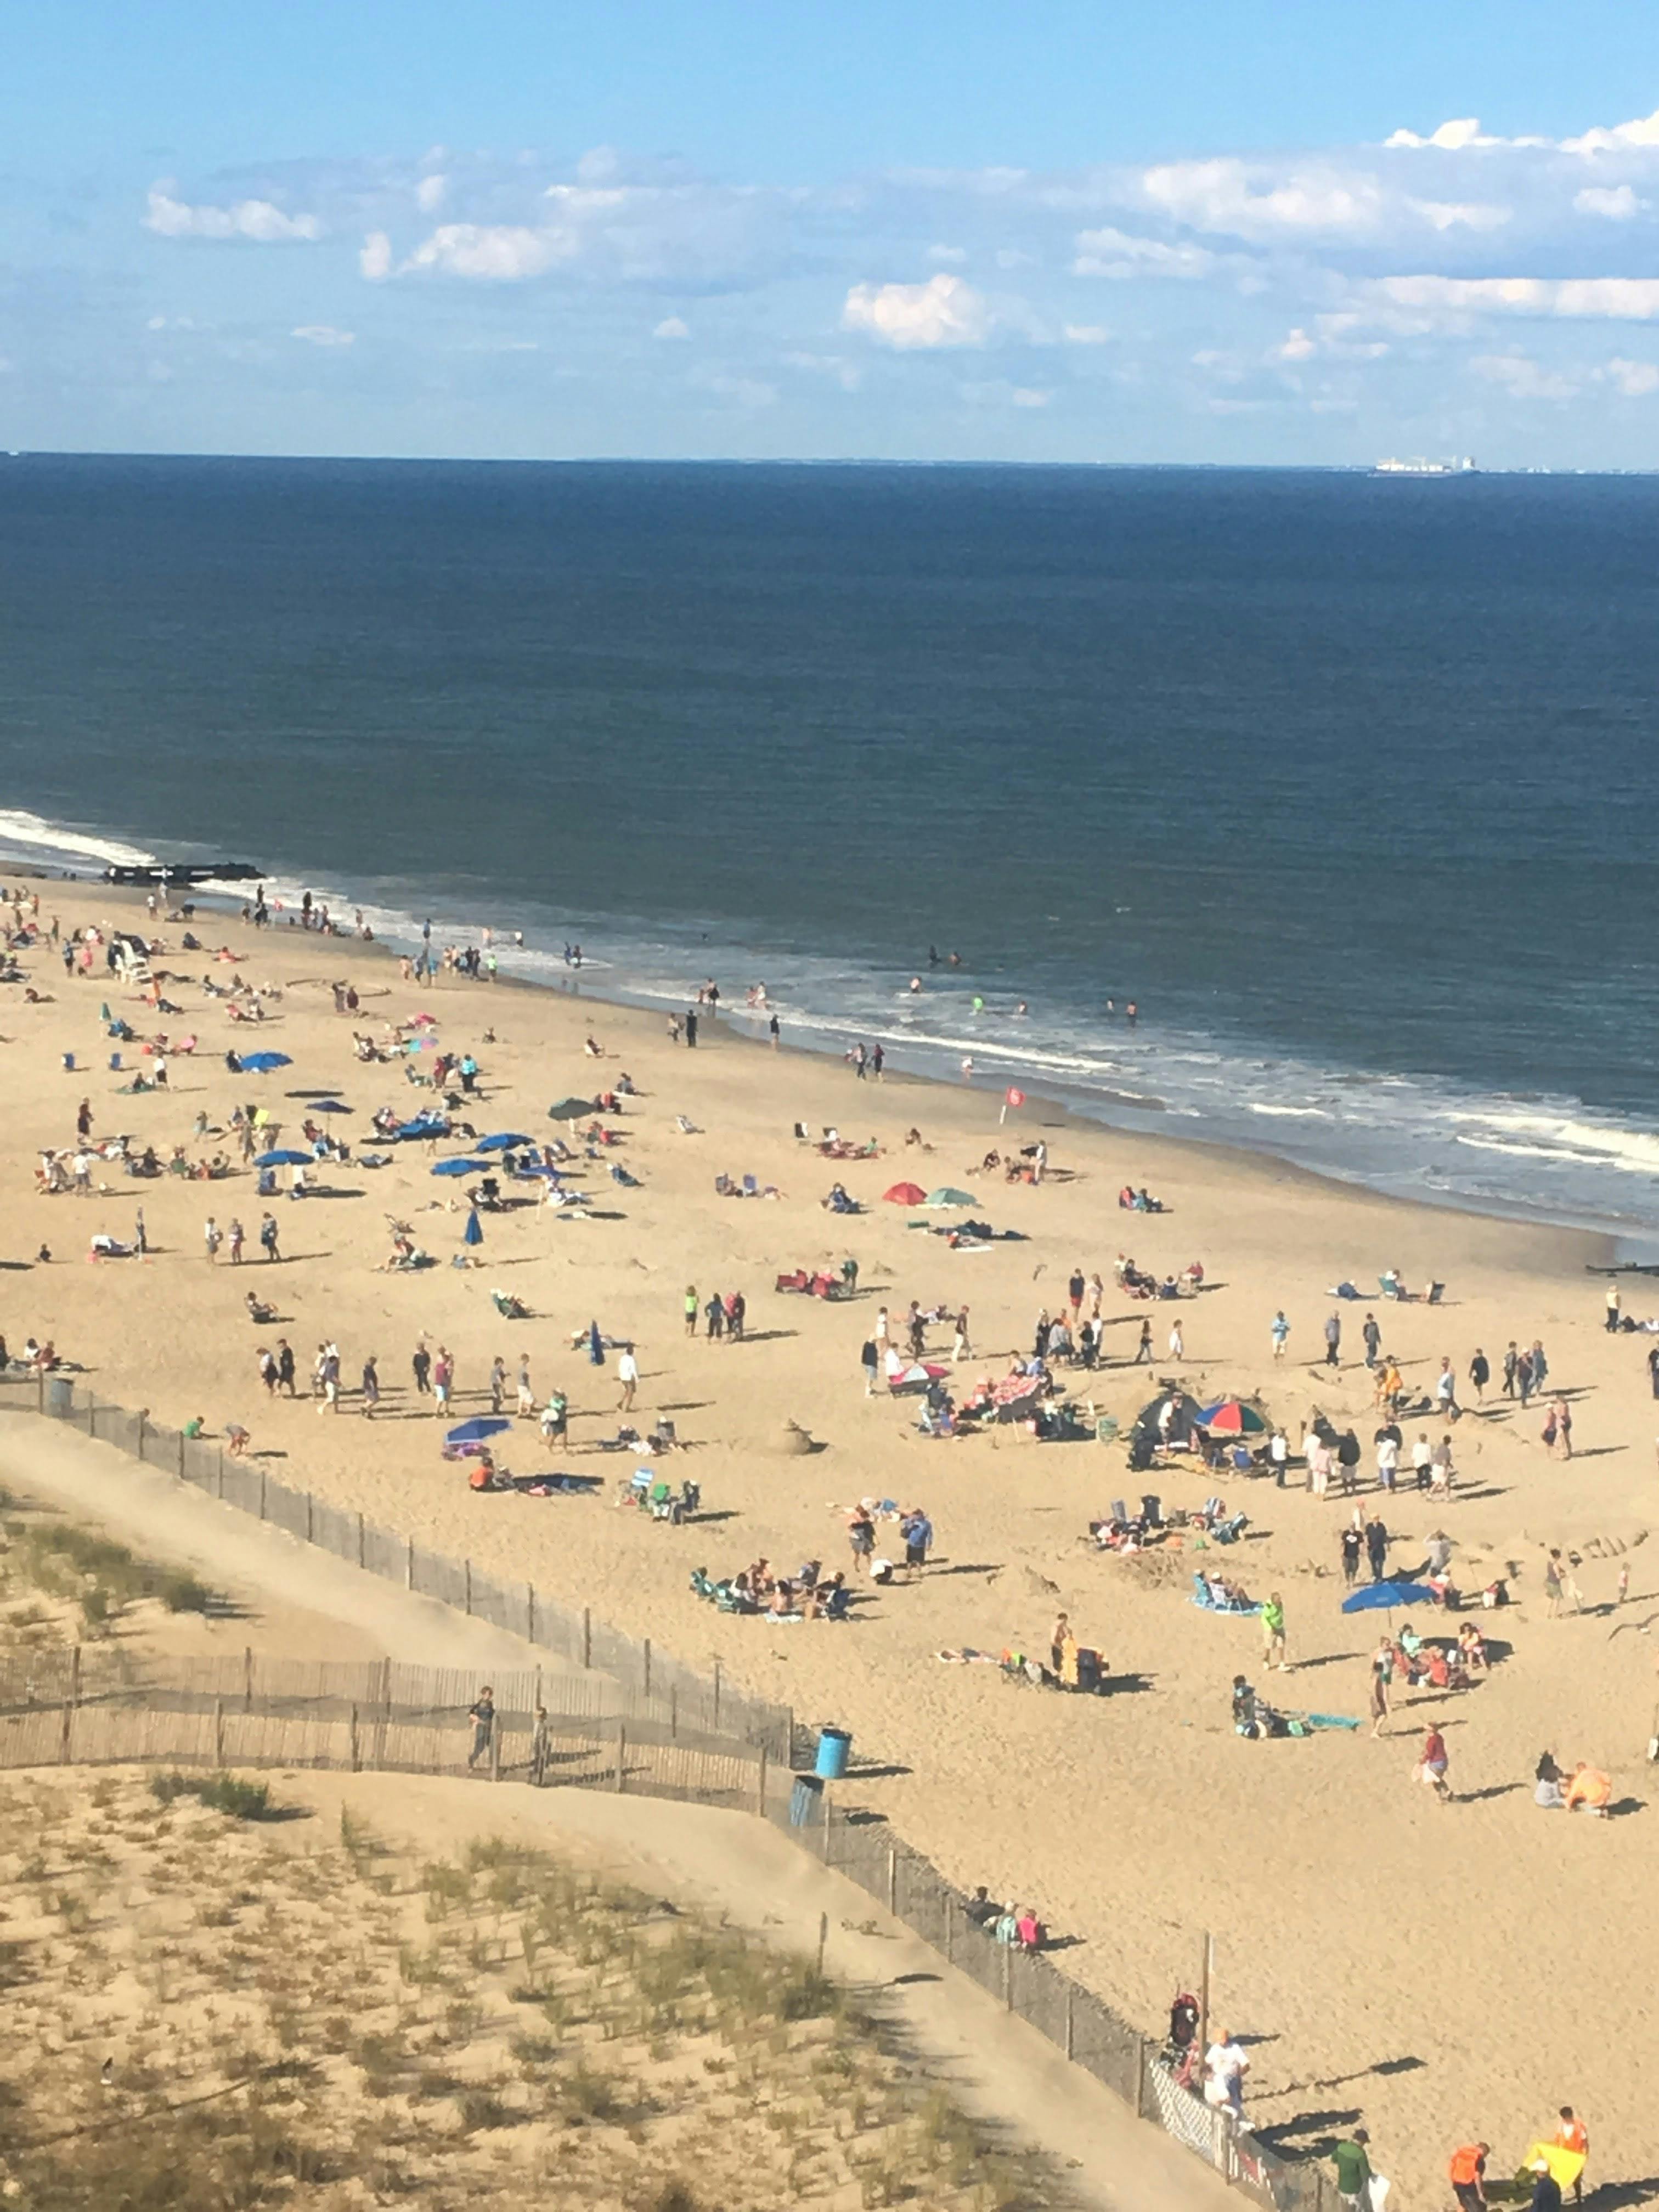 Weekend trip to Rehoboth Beach from Philly